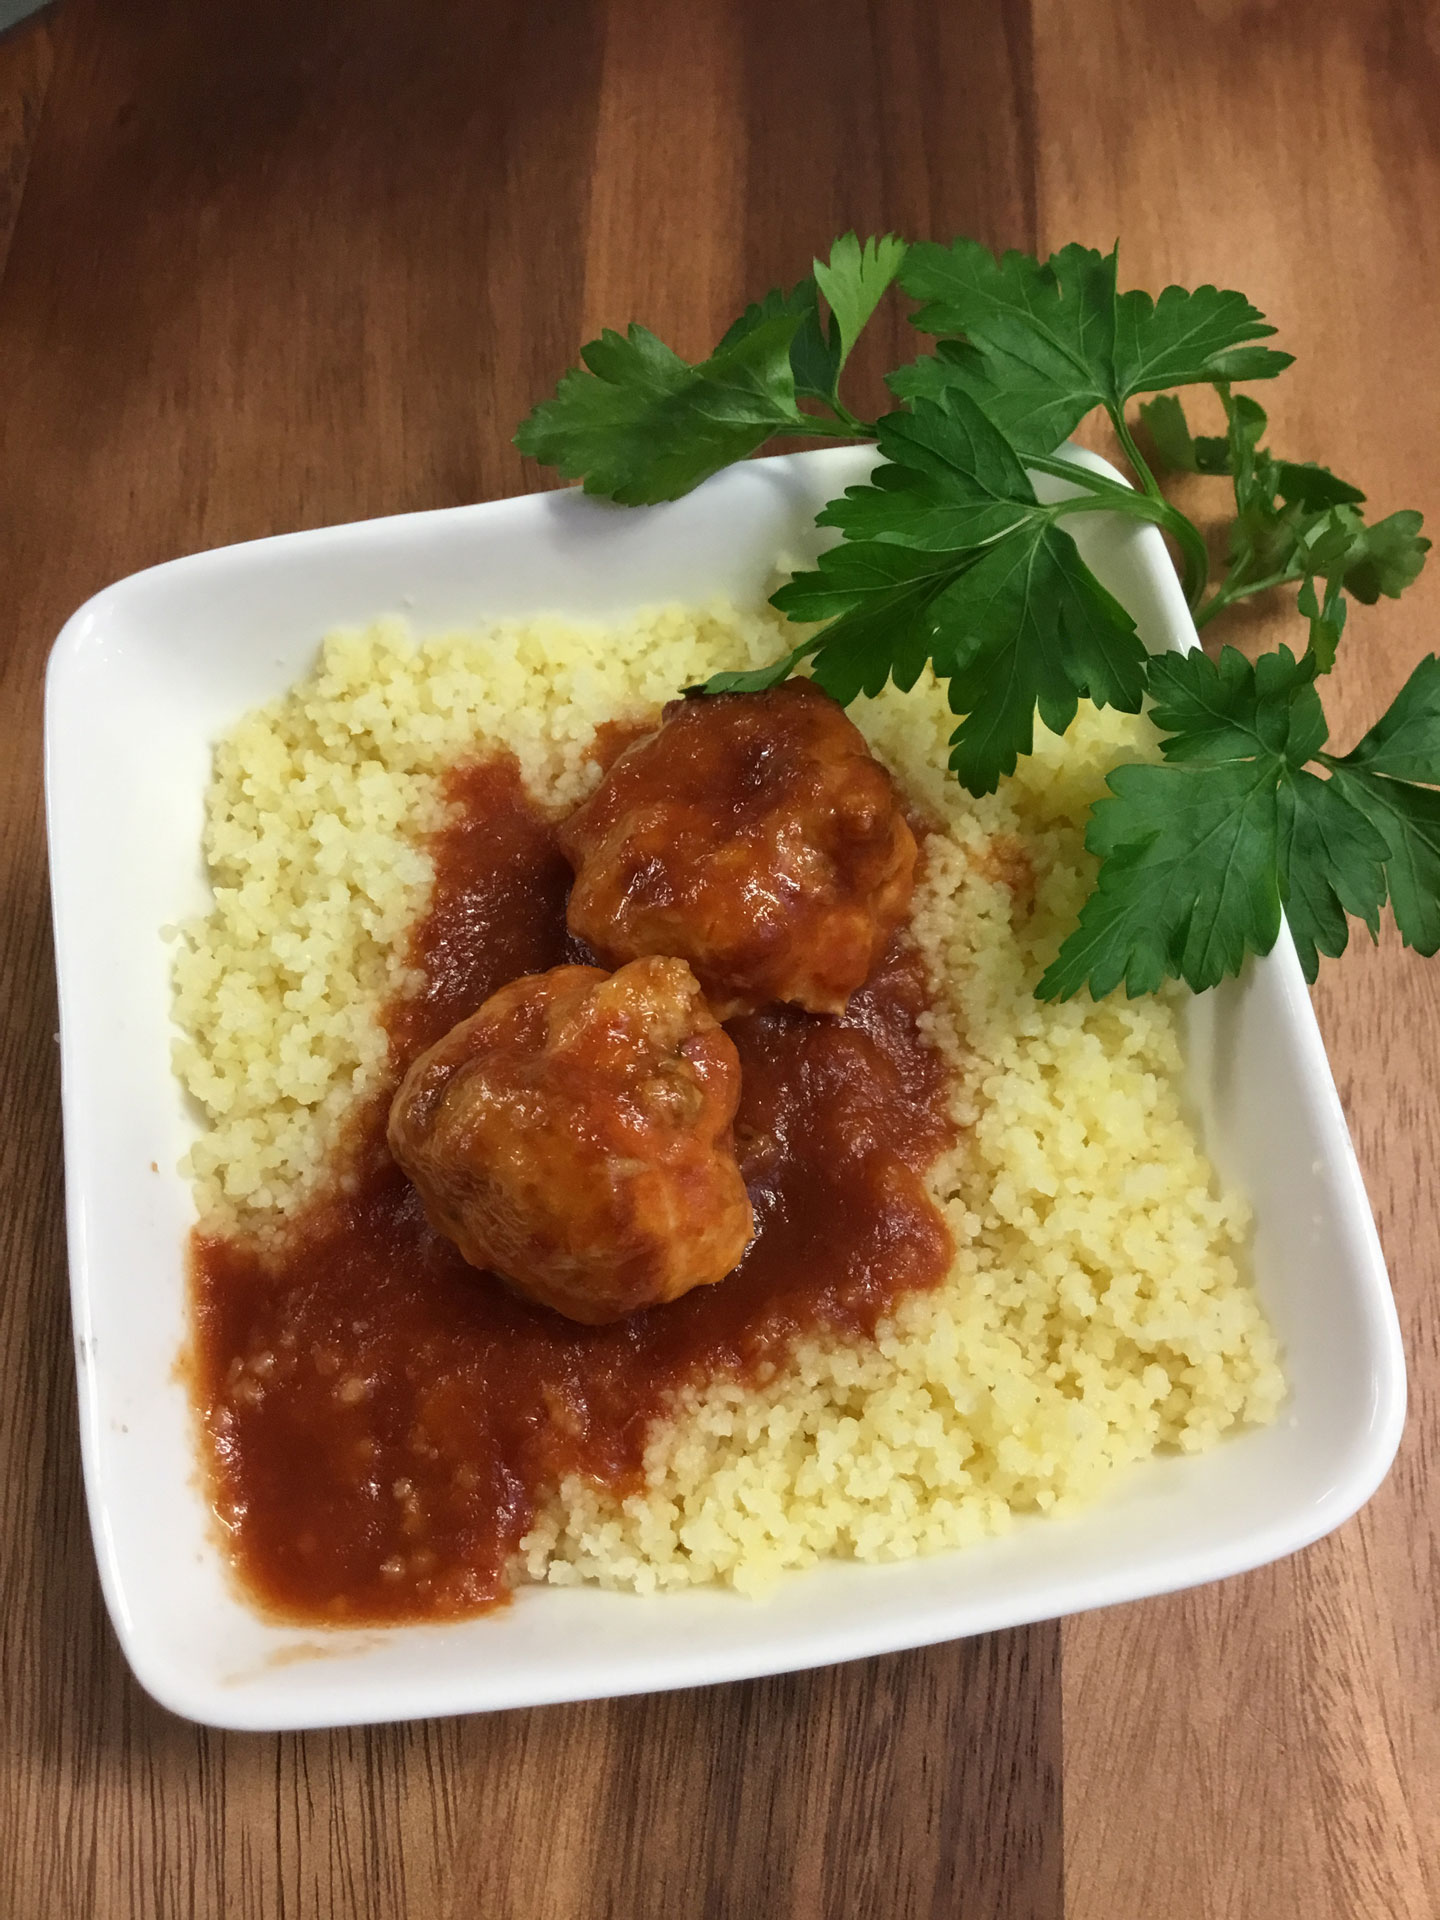 Cous cous and meatballs with marinara sauce, garnished with parsley